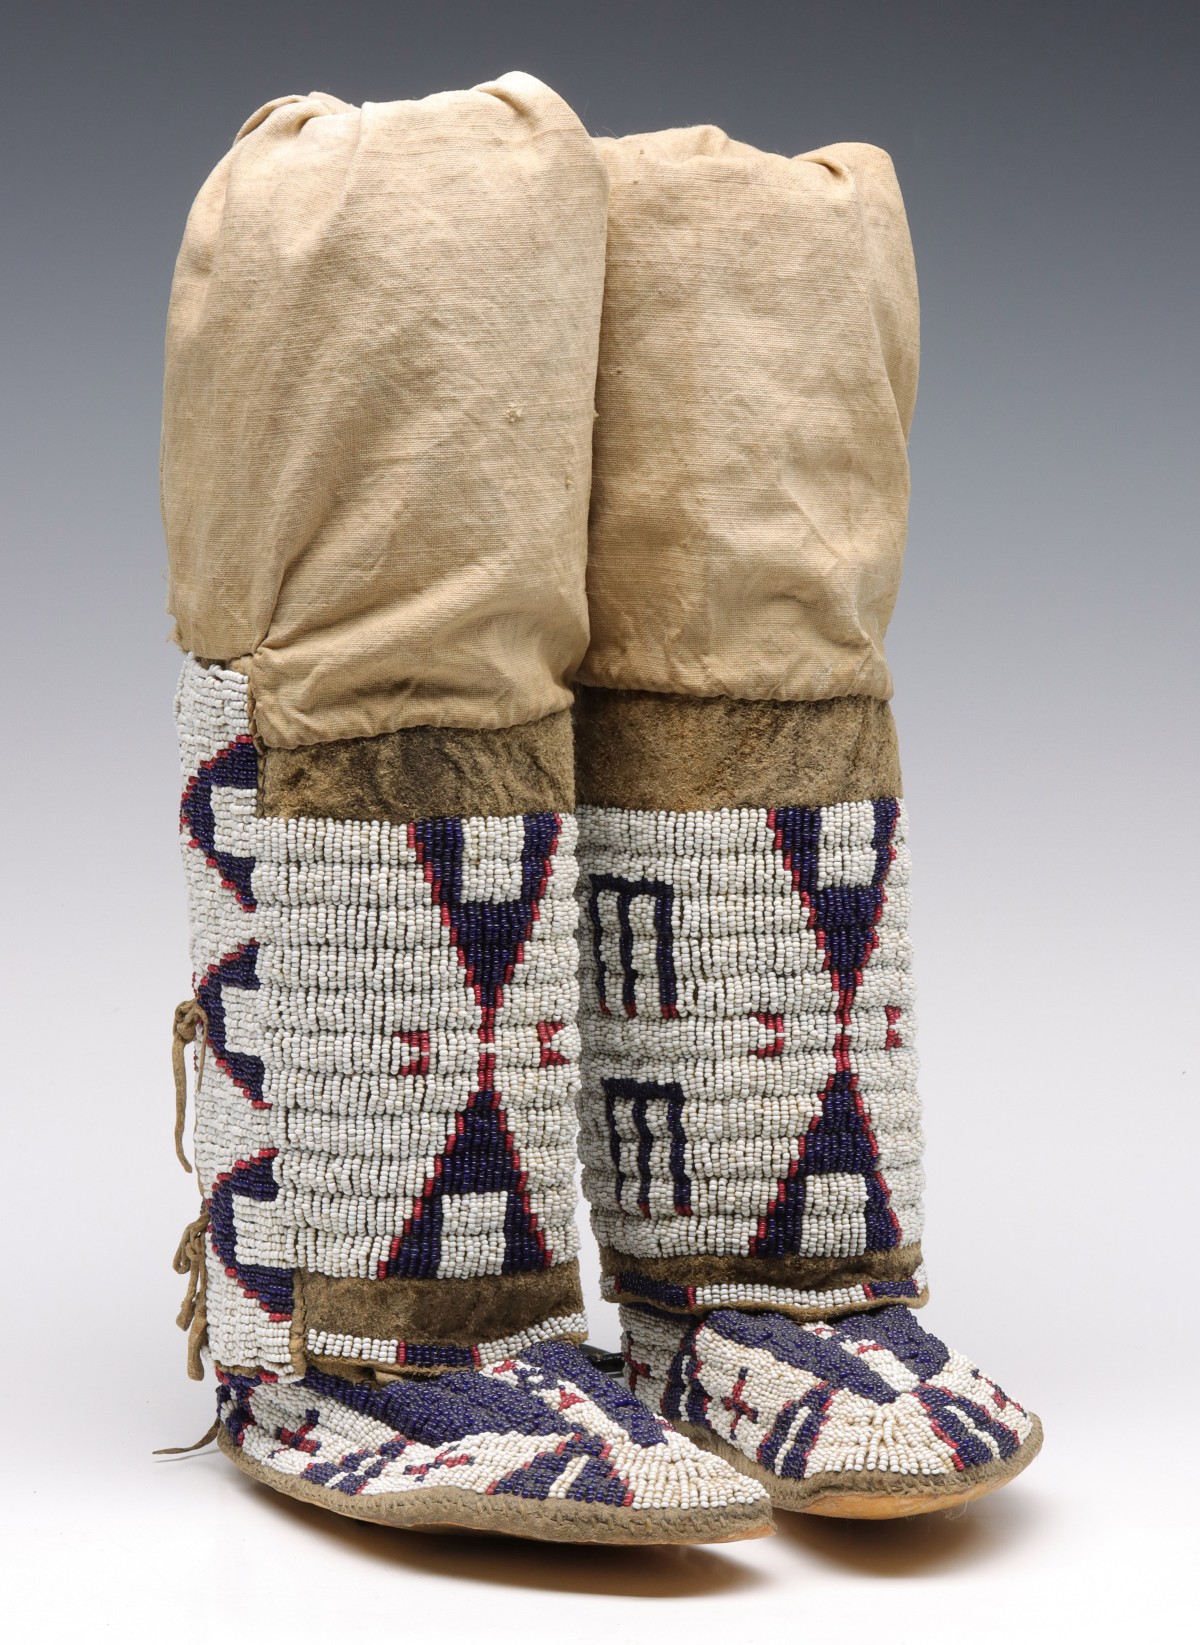 CHEYENNE GIRL'S BEADED MOCCASINS WITH MATCHING LEGGINGS